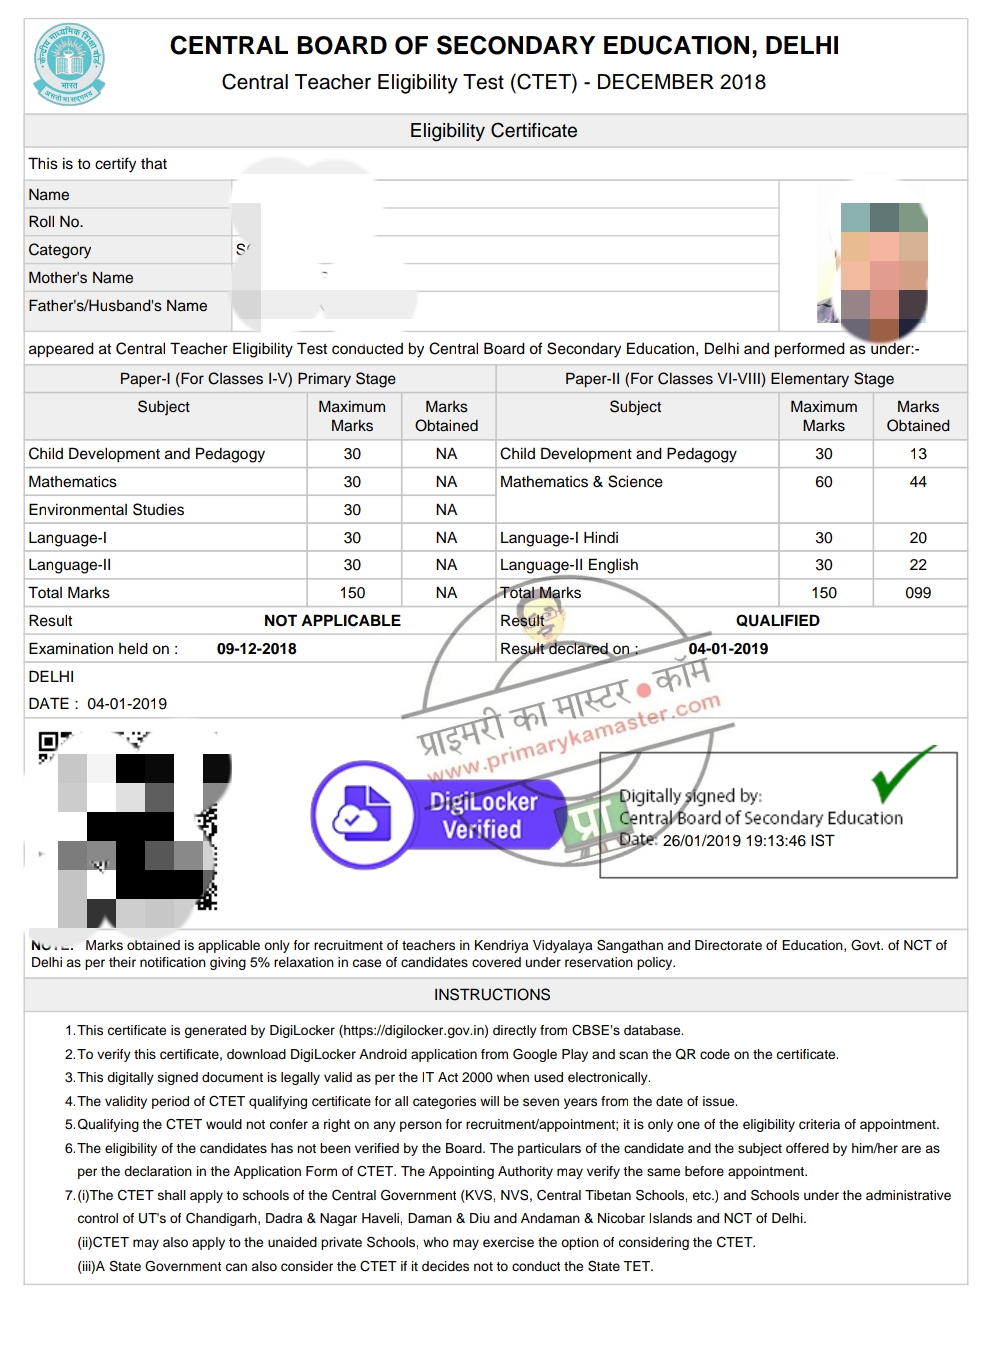 CTET Dec 2021 Result Out See How to Download CTET Certificate from